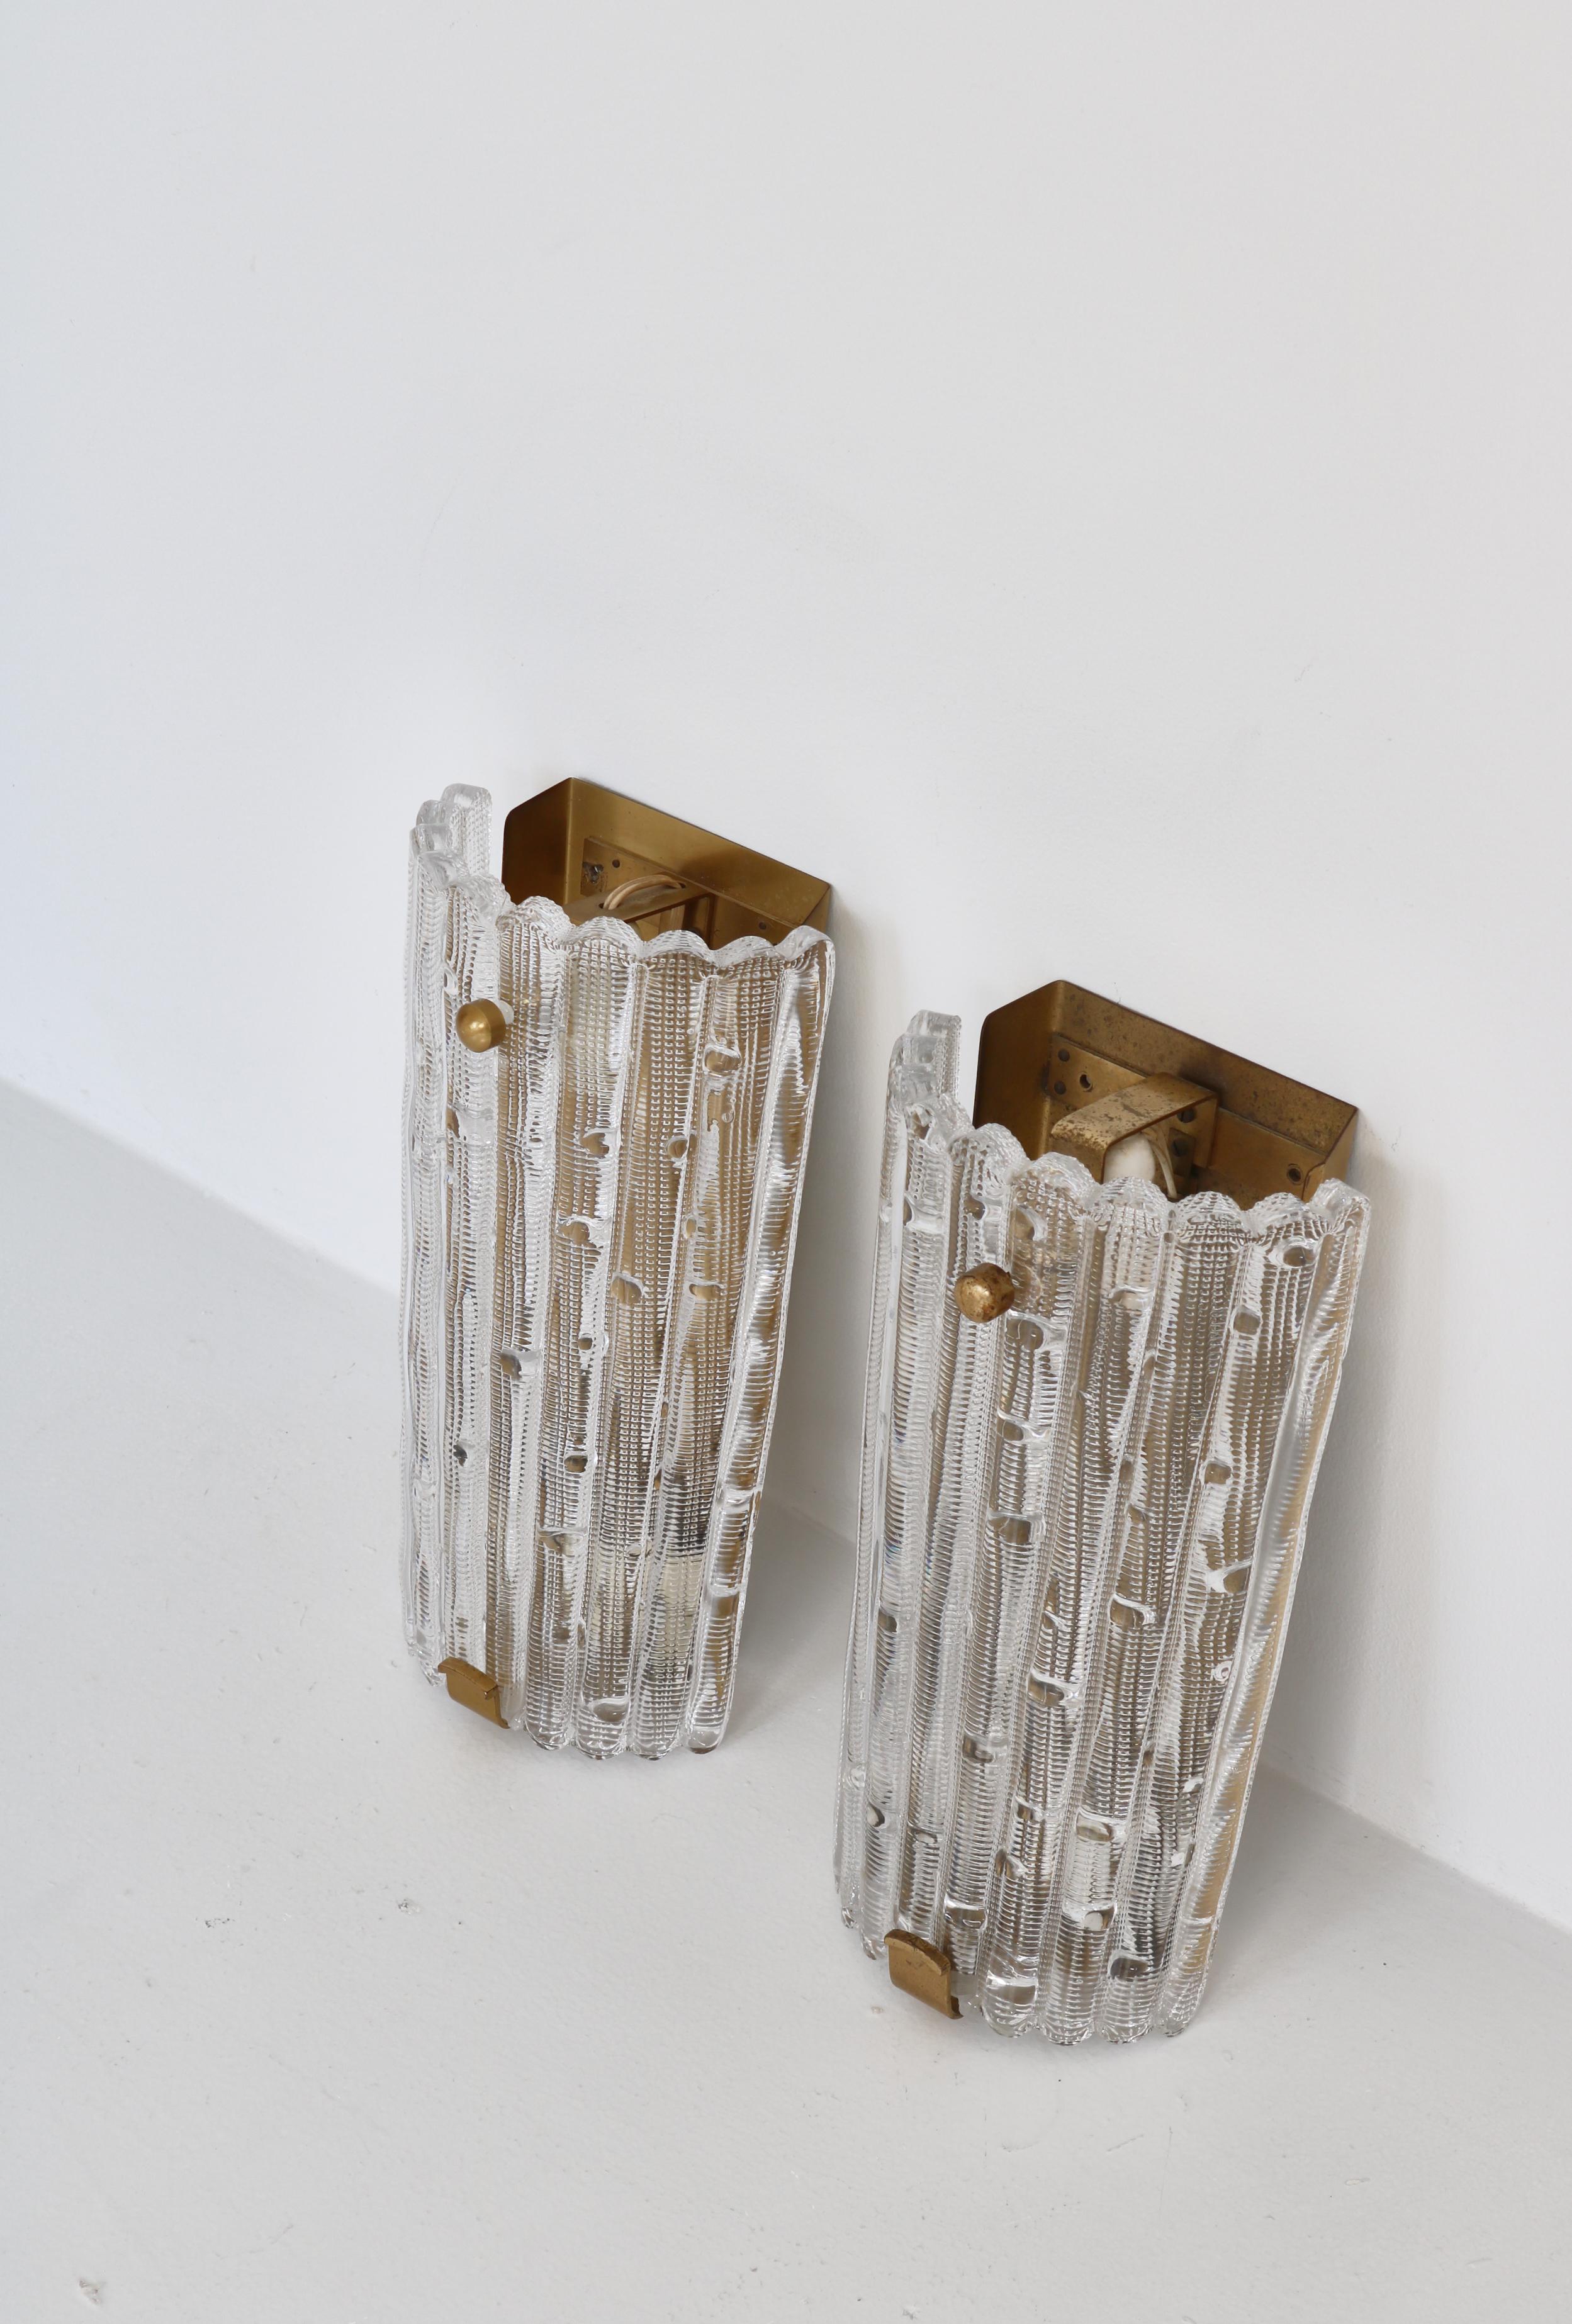 Set of Large Crystal Glass & Brass Wall Sconces by Lyfa Orrefors, Denmark, 1950s For Sale 7